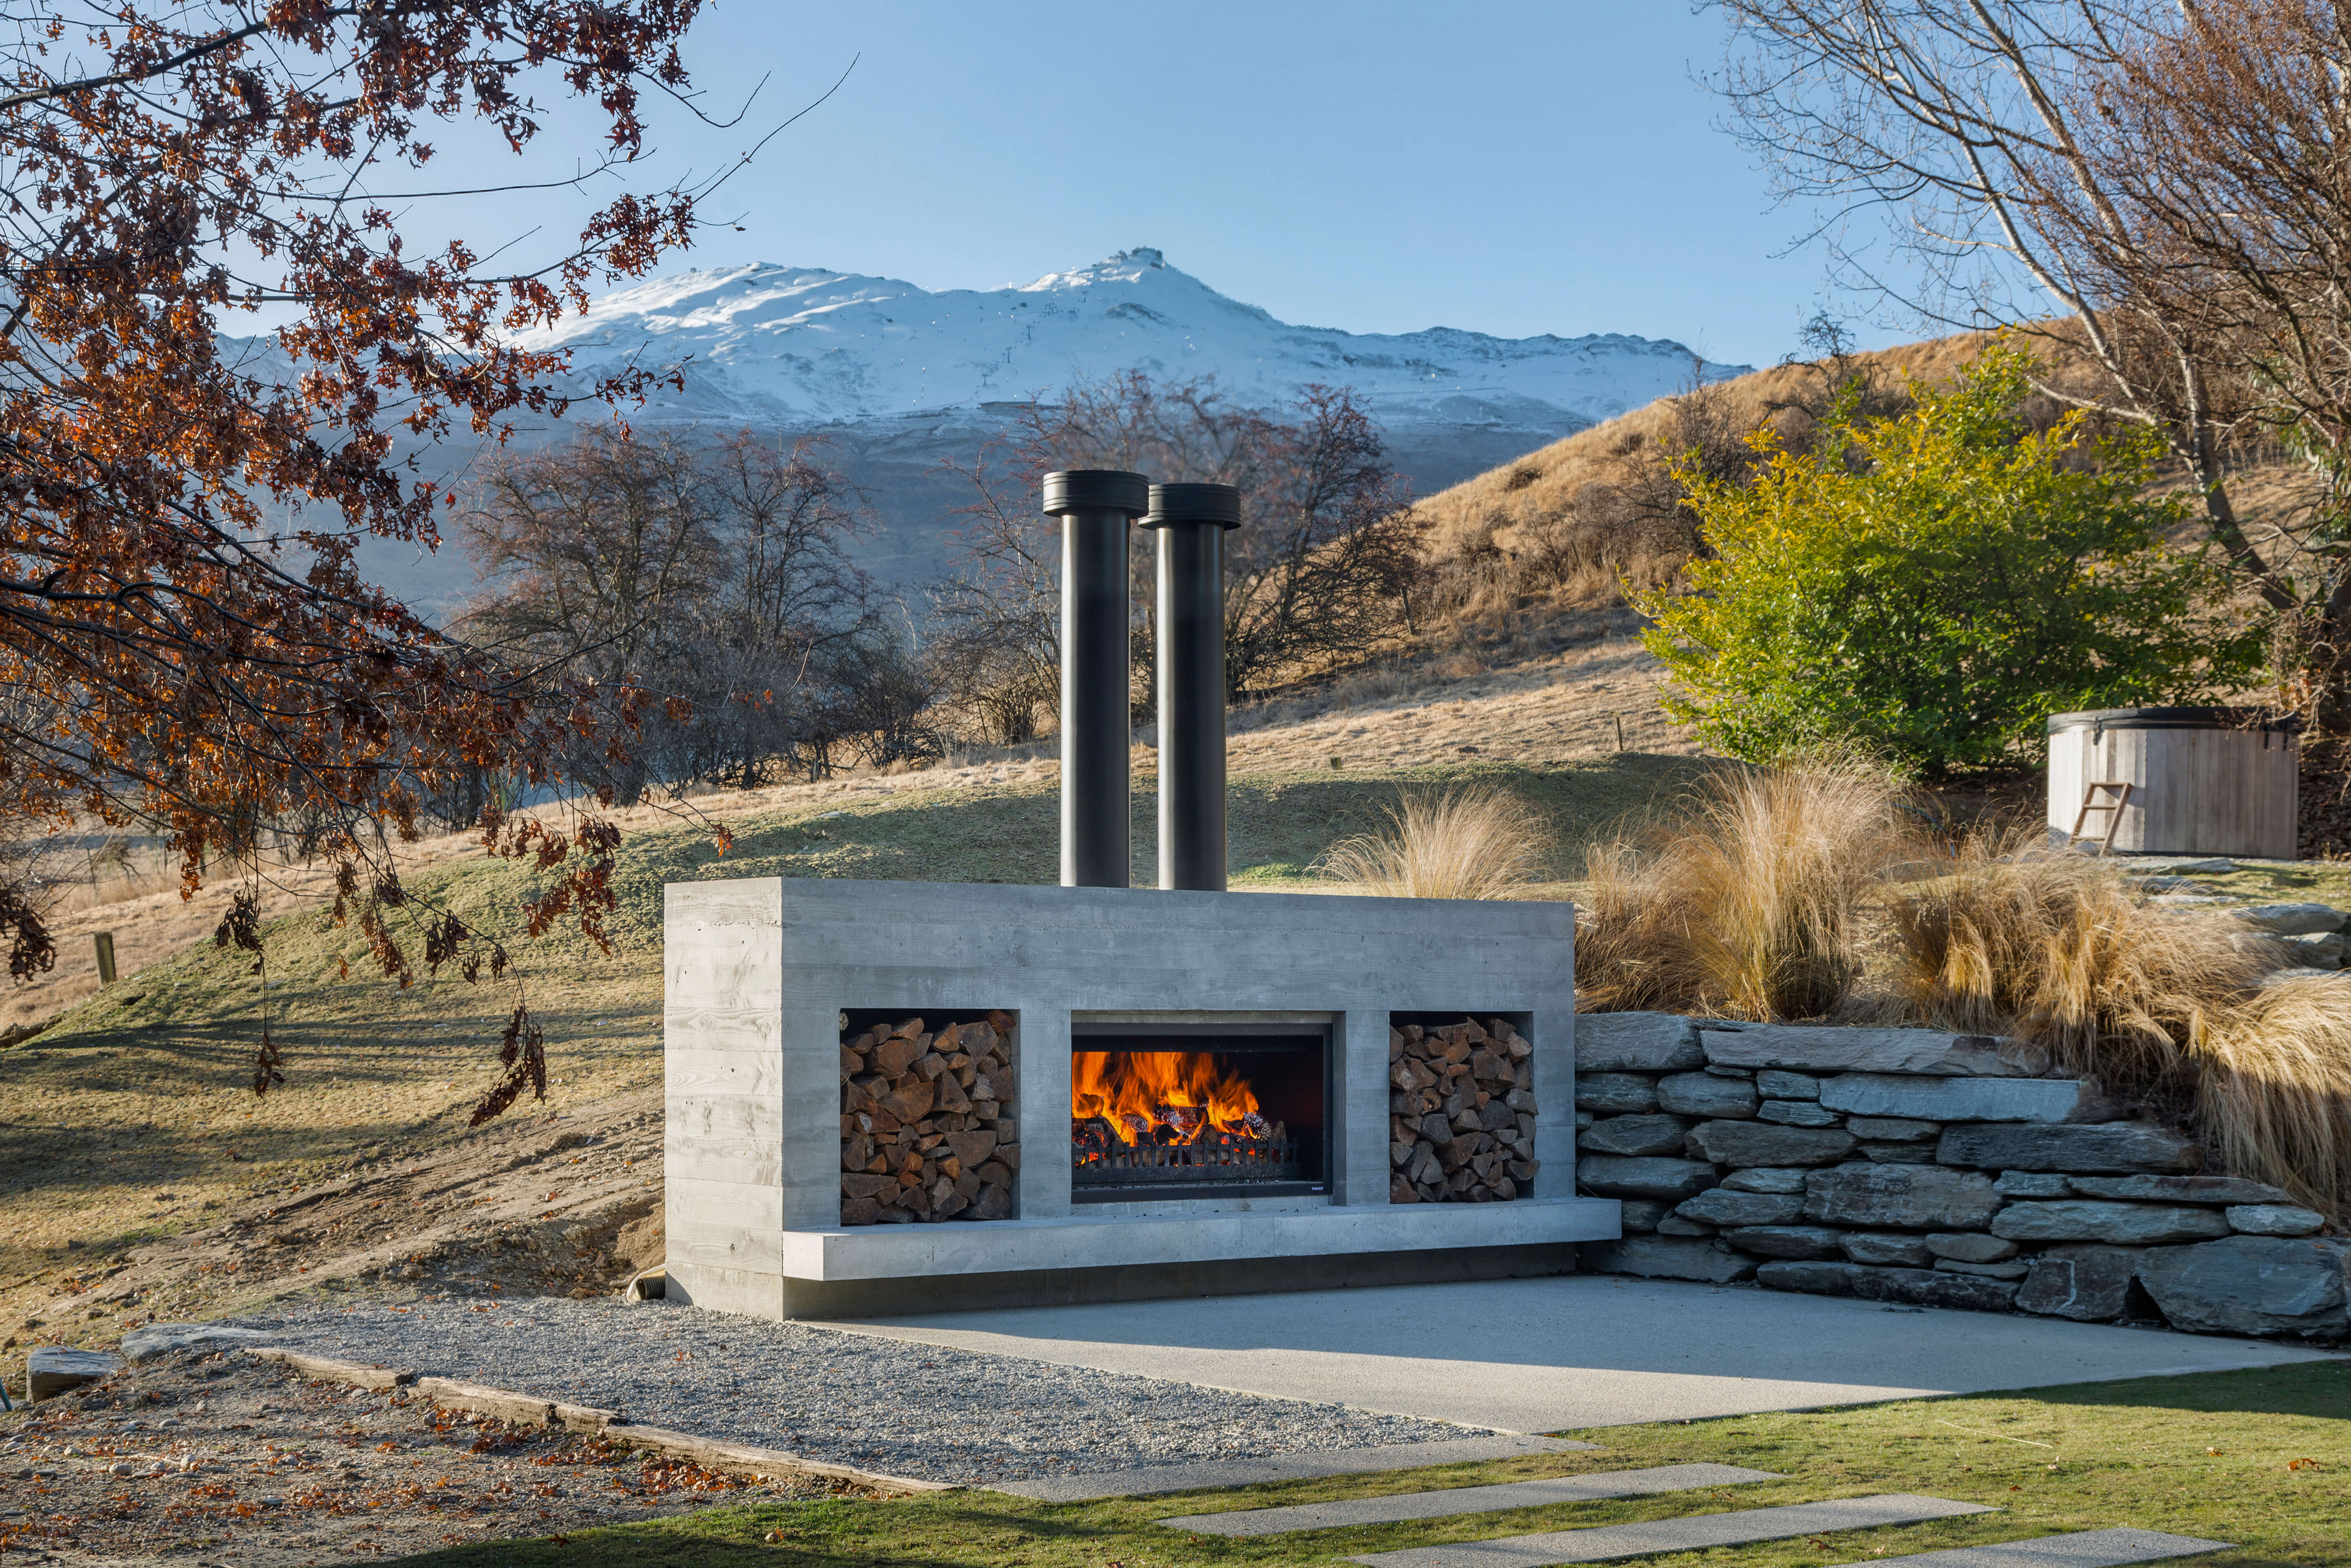 Entertaining areas with an outdoor fireplace